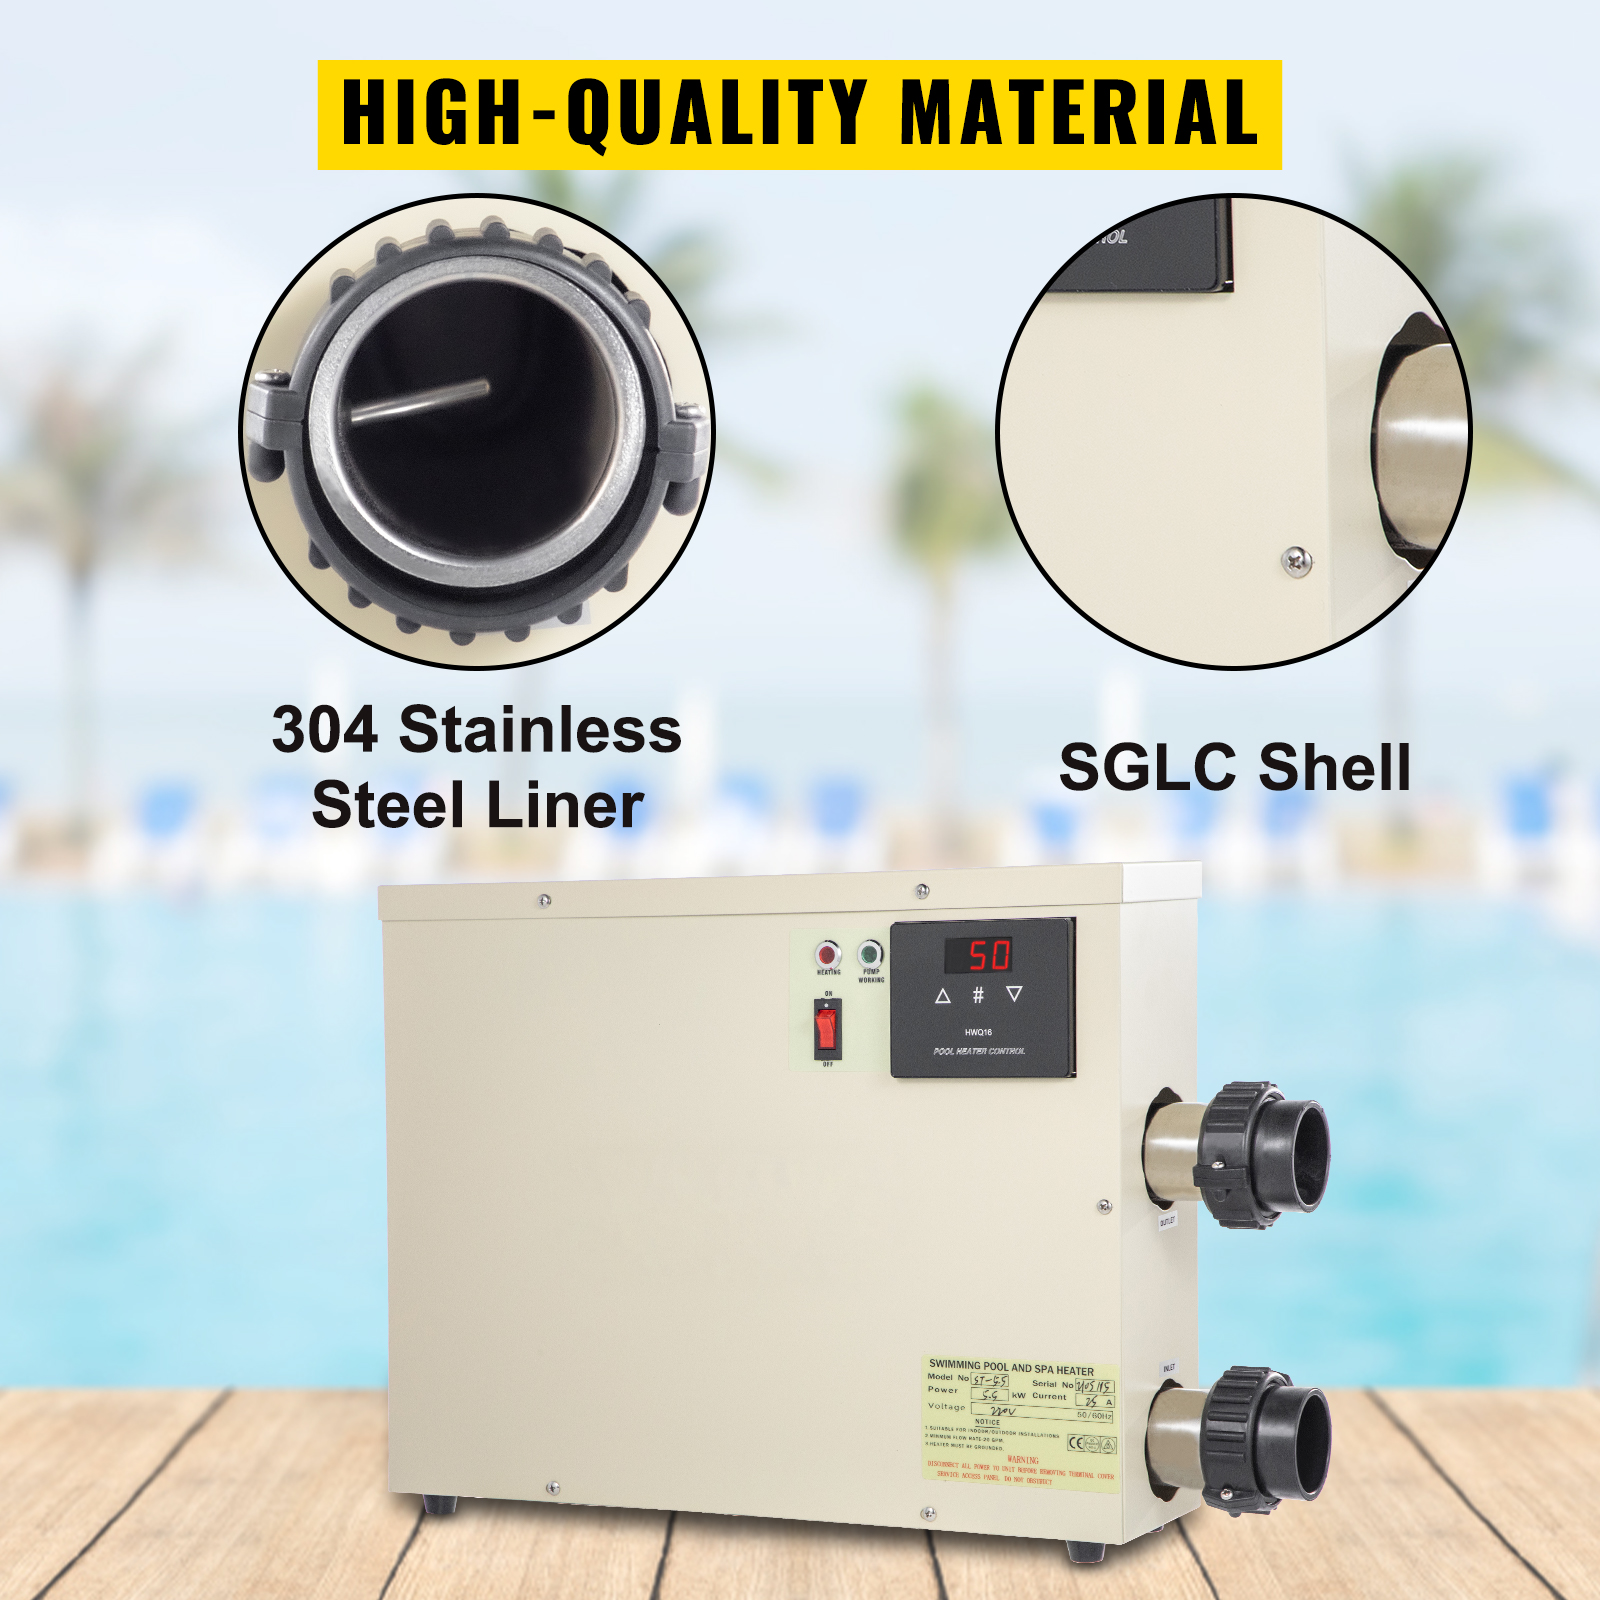 CMQ 240V 9KW Electric Pool Water Heater for Above Ground Inground Pool,Upgrade Portable SPA Water Bath Heater Thermostat Swimming Pool Thermostat Heater Pump 